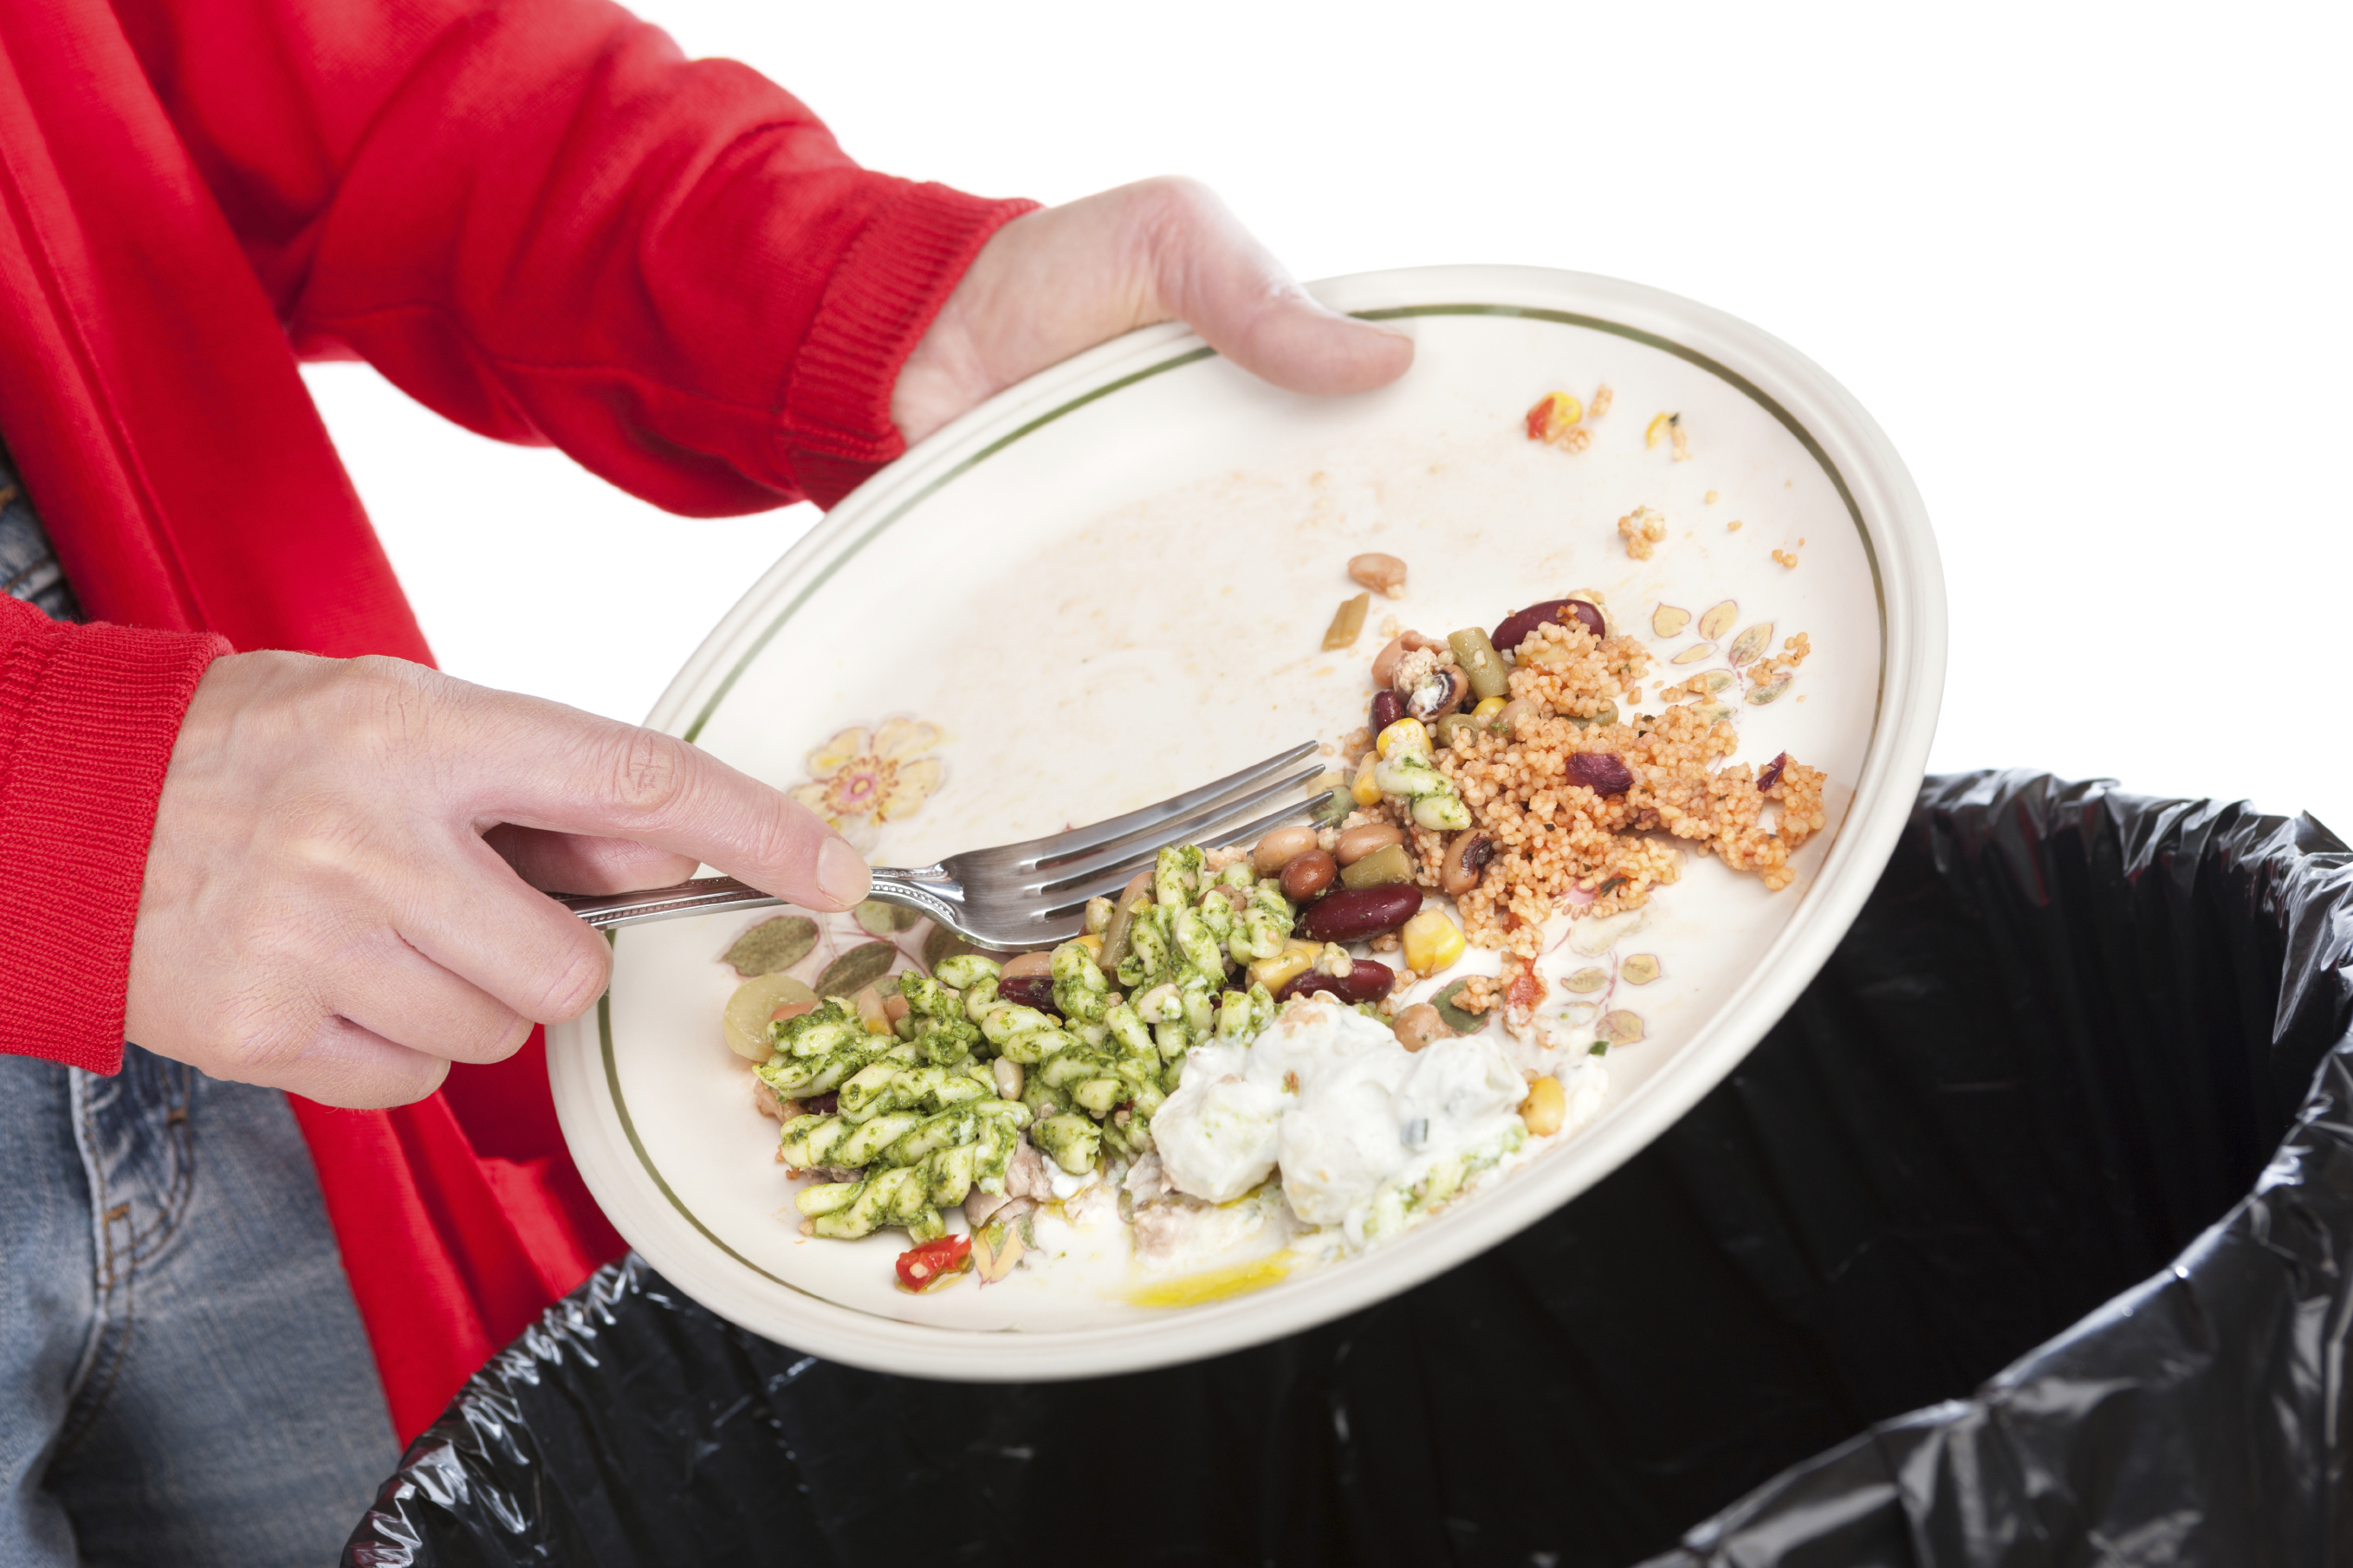 Close-up of a woman sweeping the leftovers from a meal into a garbage bin. The background is pure white.